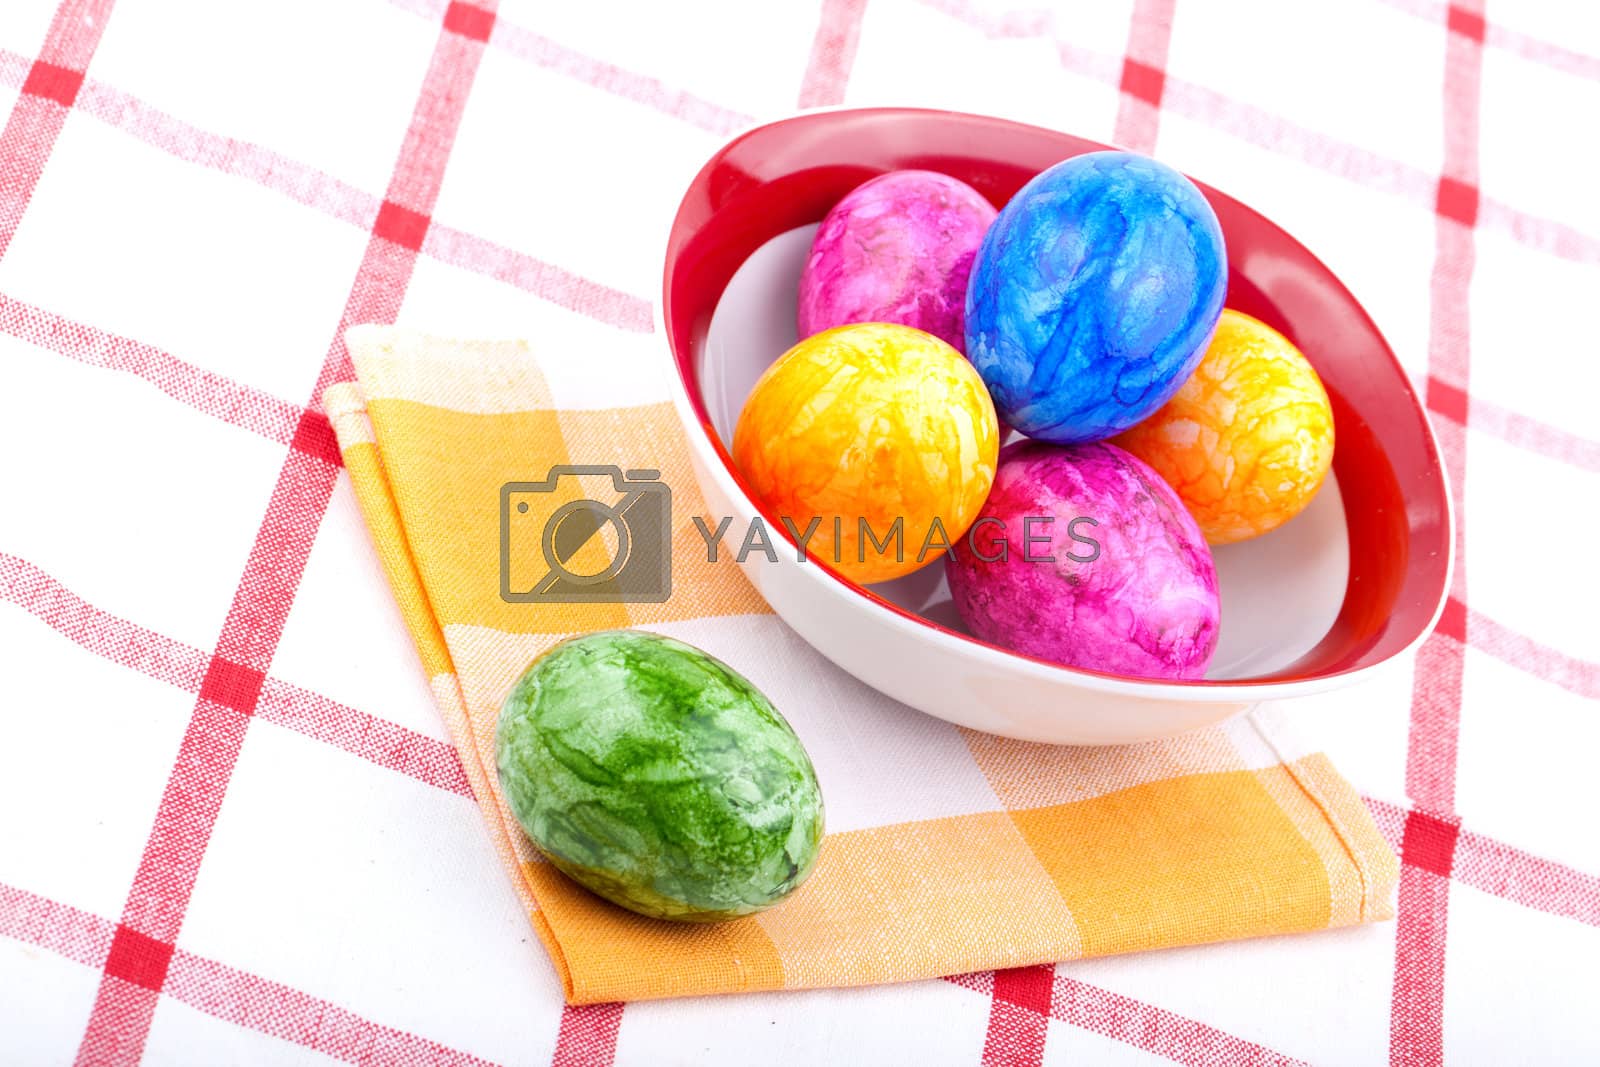 Royalty free image of easter egg on the table by motorolka